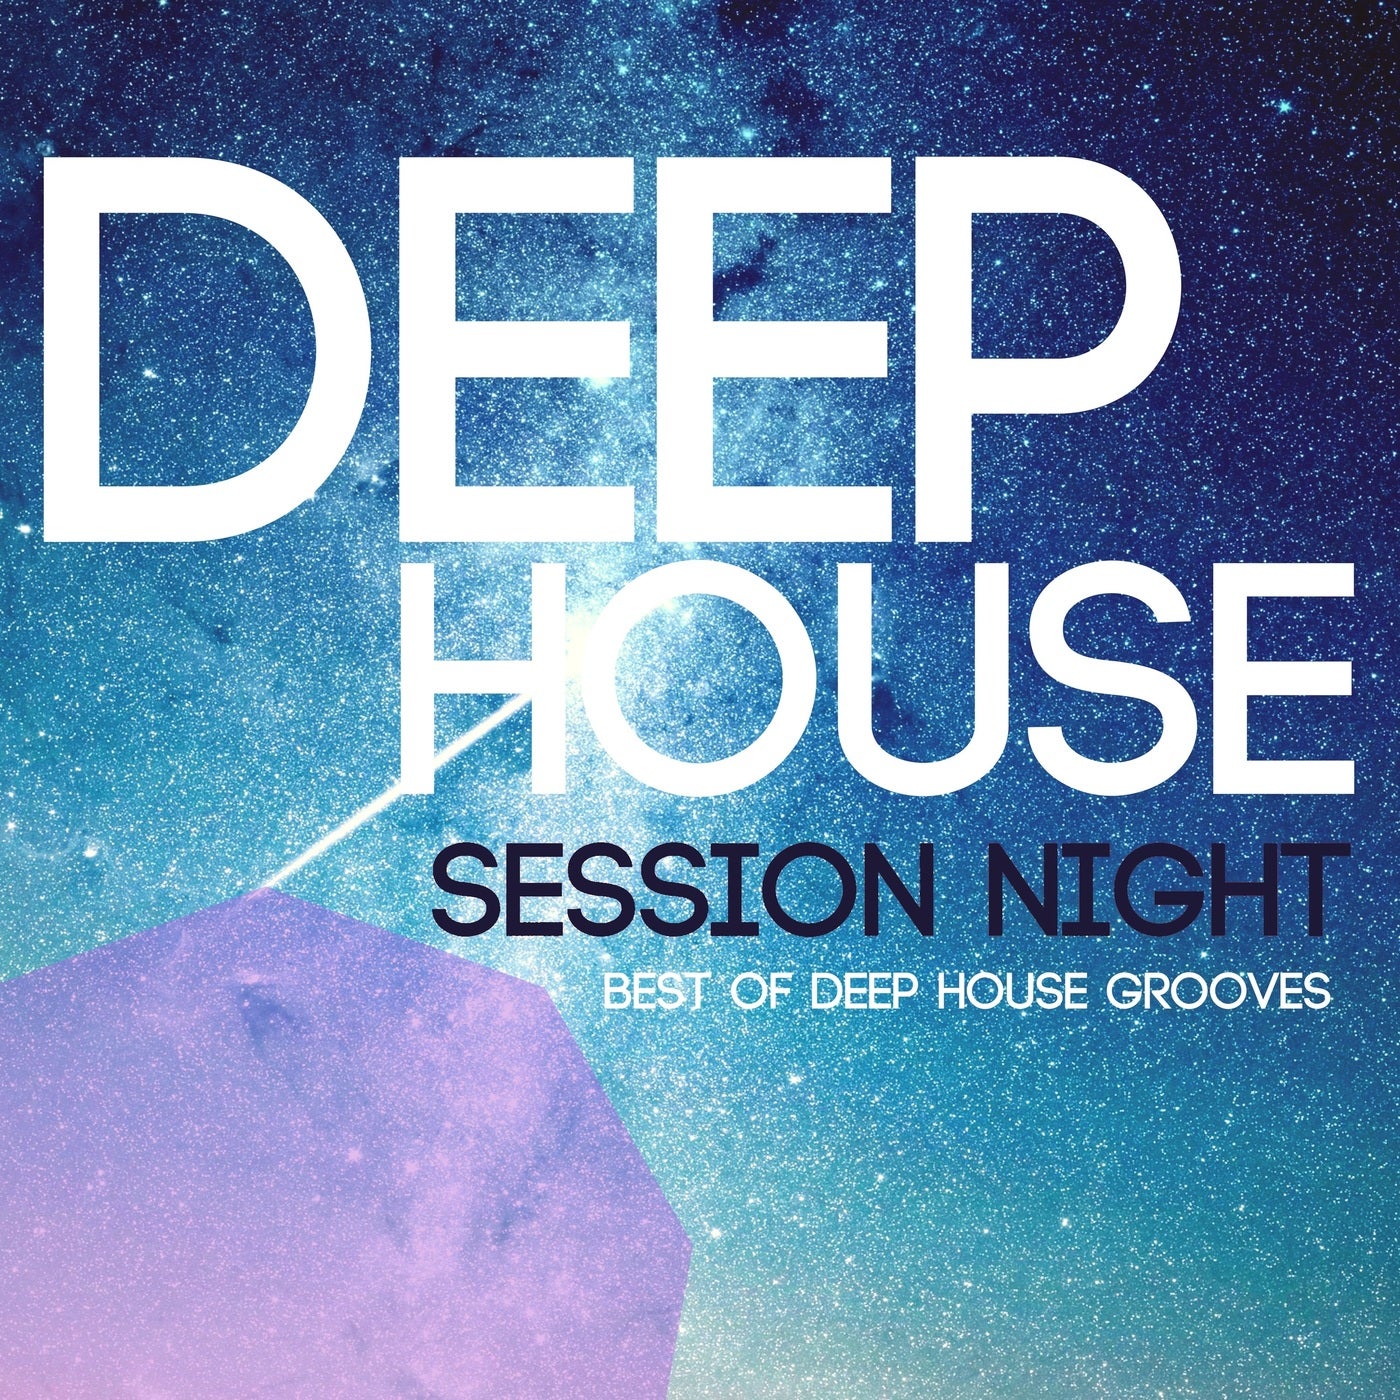 Deep House Session Night: Best of Deep House Grooves